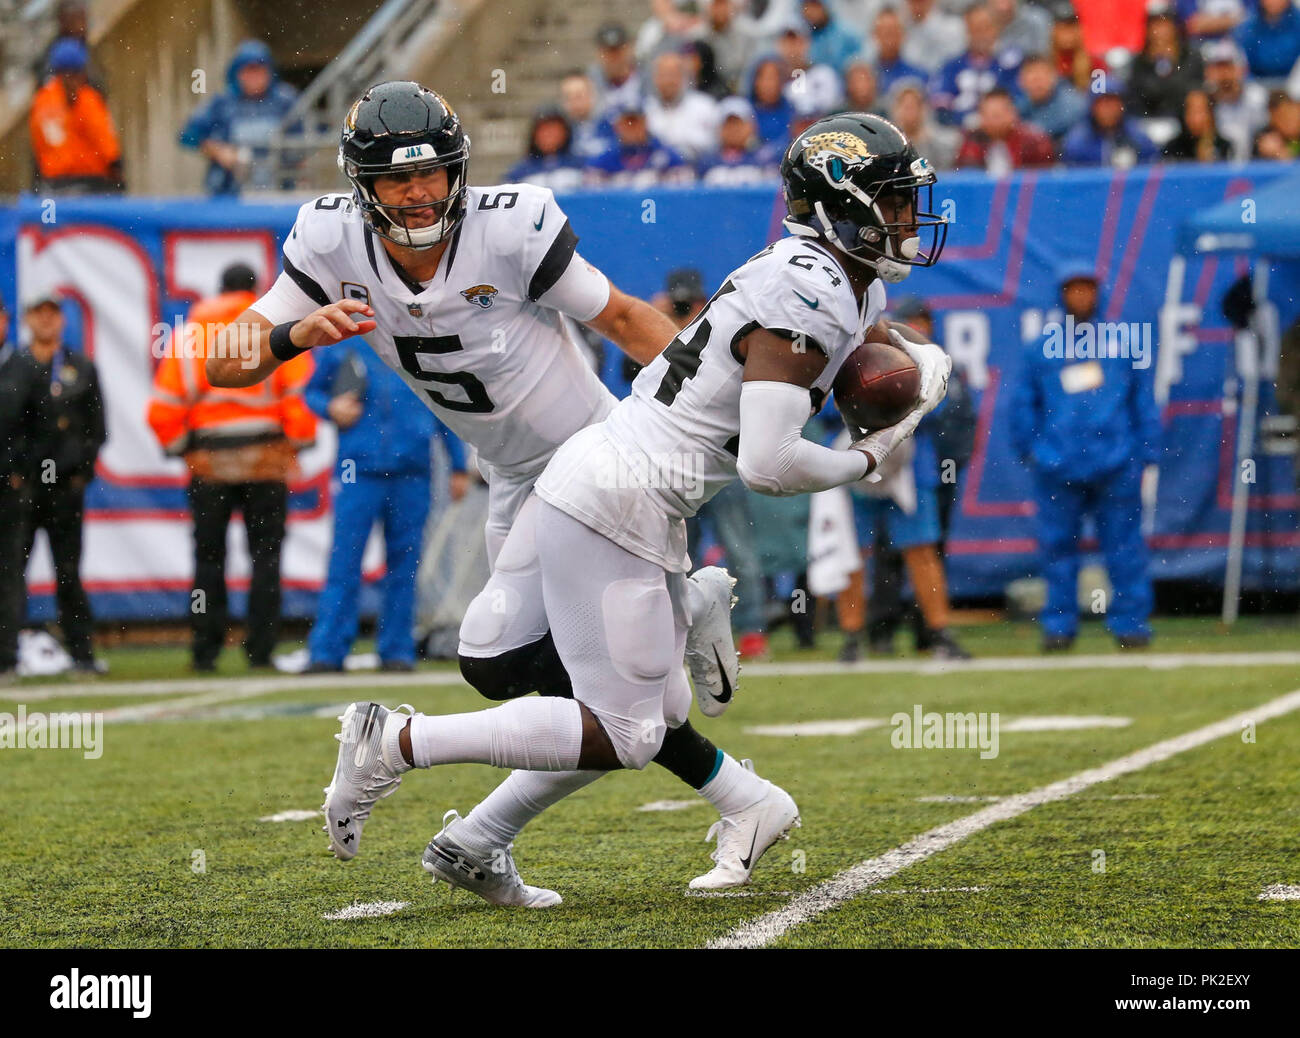 September 9, 2018 - East Rutherford, New Jersey, U.S. - Jacksonville Jaguars quarterback Blake Bortles (5) hands off to running back T.J. Yeldon (24) during a NFL game between the Jacksonville Jaguars and the New York Giants at MetLife Stadium in East Rutherford, New Jersey. The Jaguars defeated the Giants 20-15. Duncan Williams/CSM Stock Photo